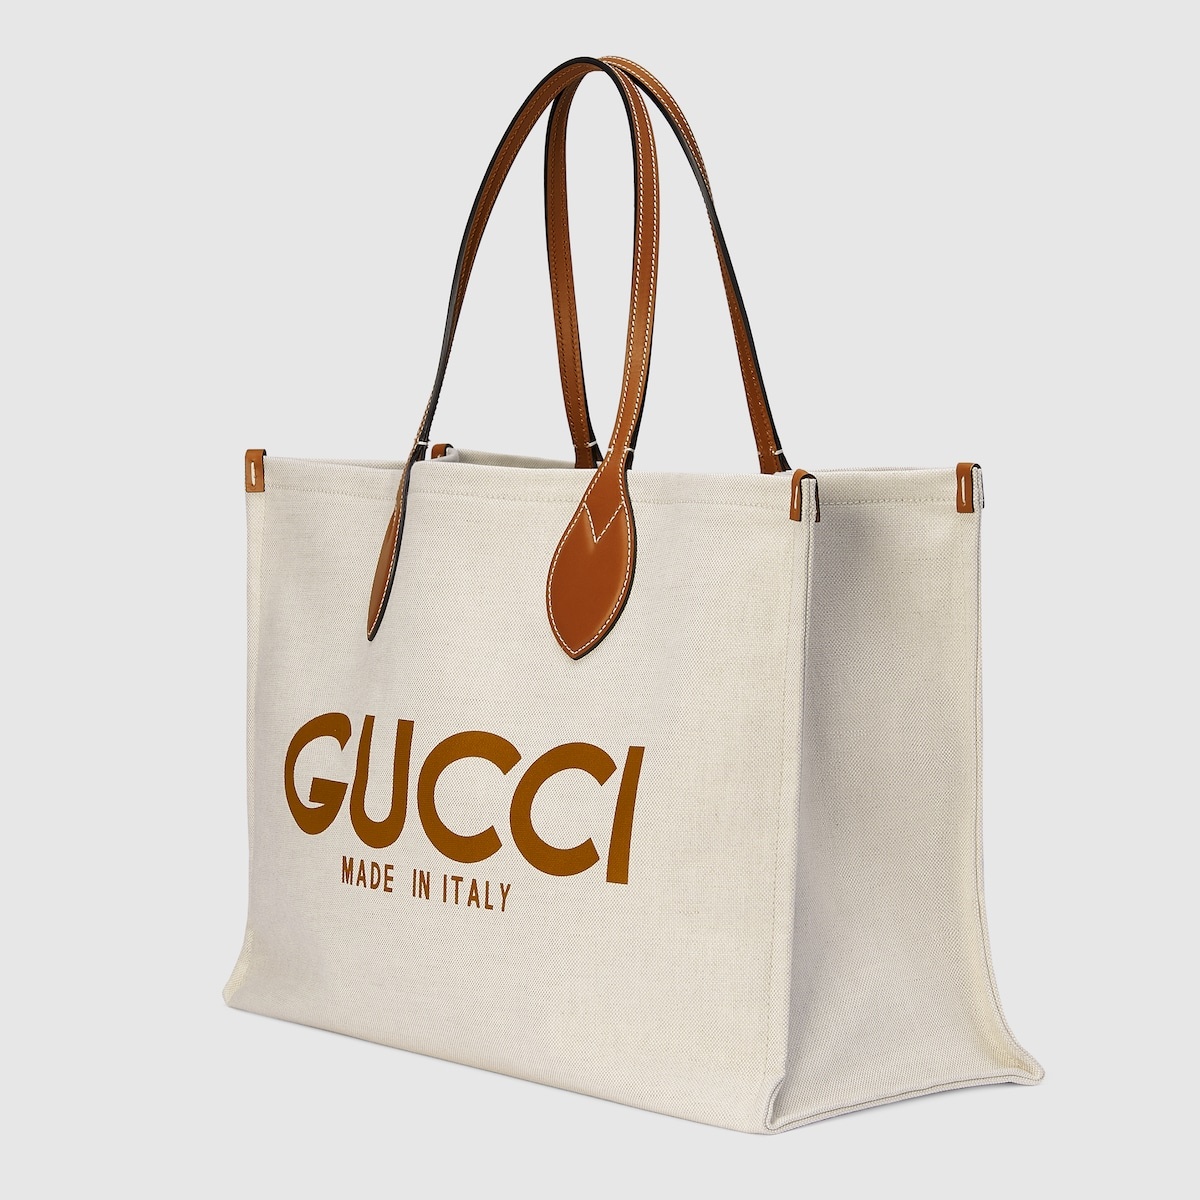 Tote bag with Gucci print - 2